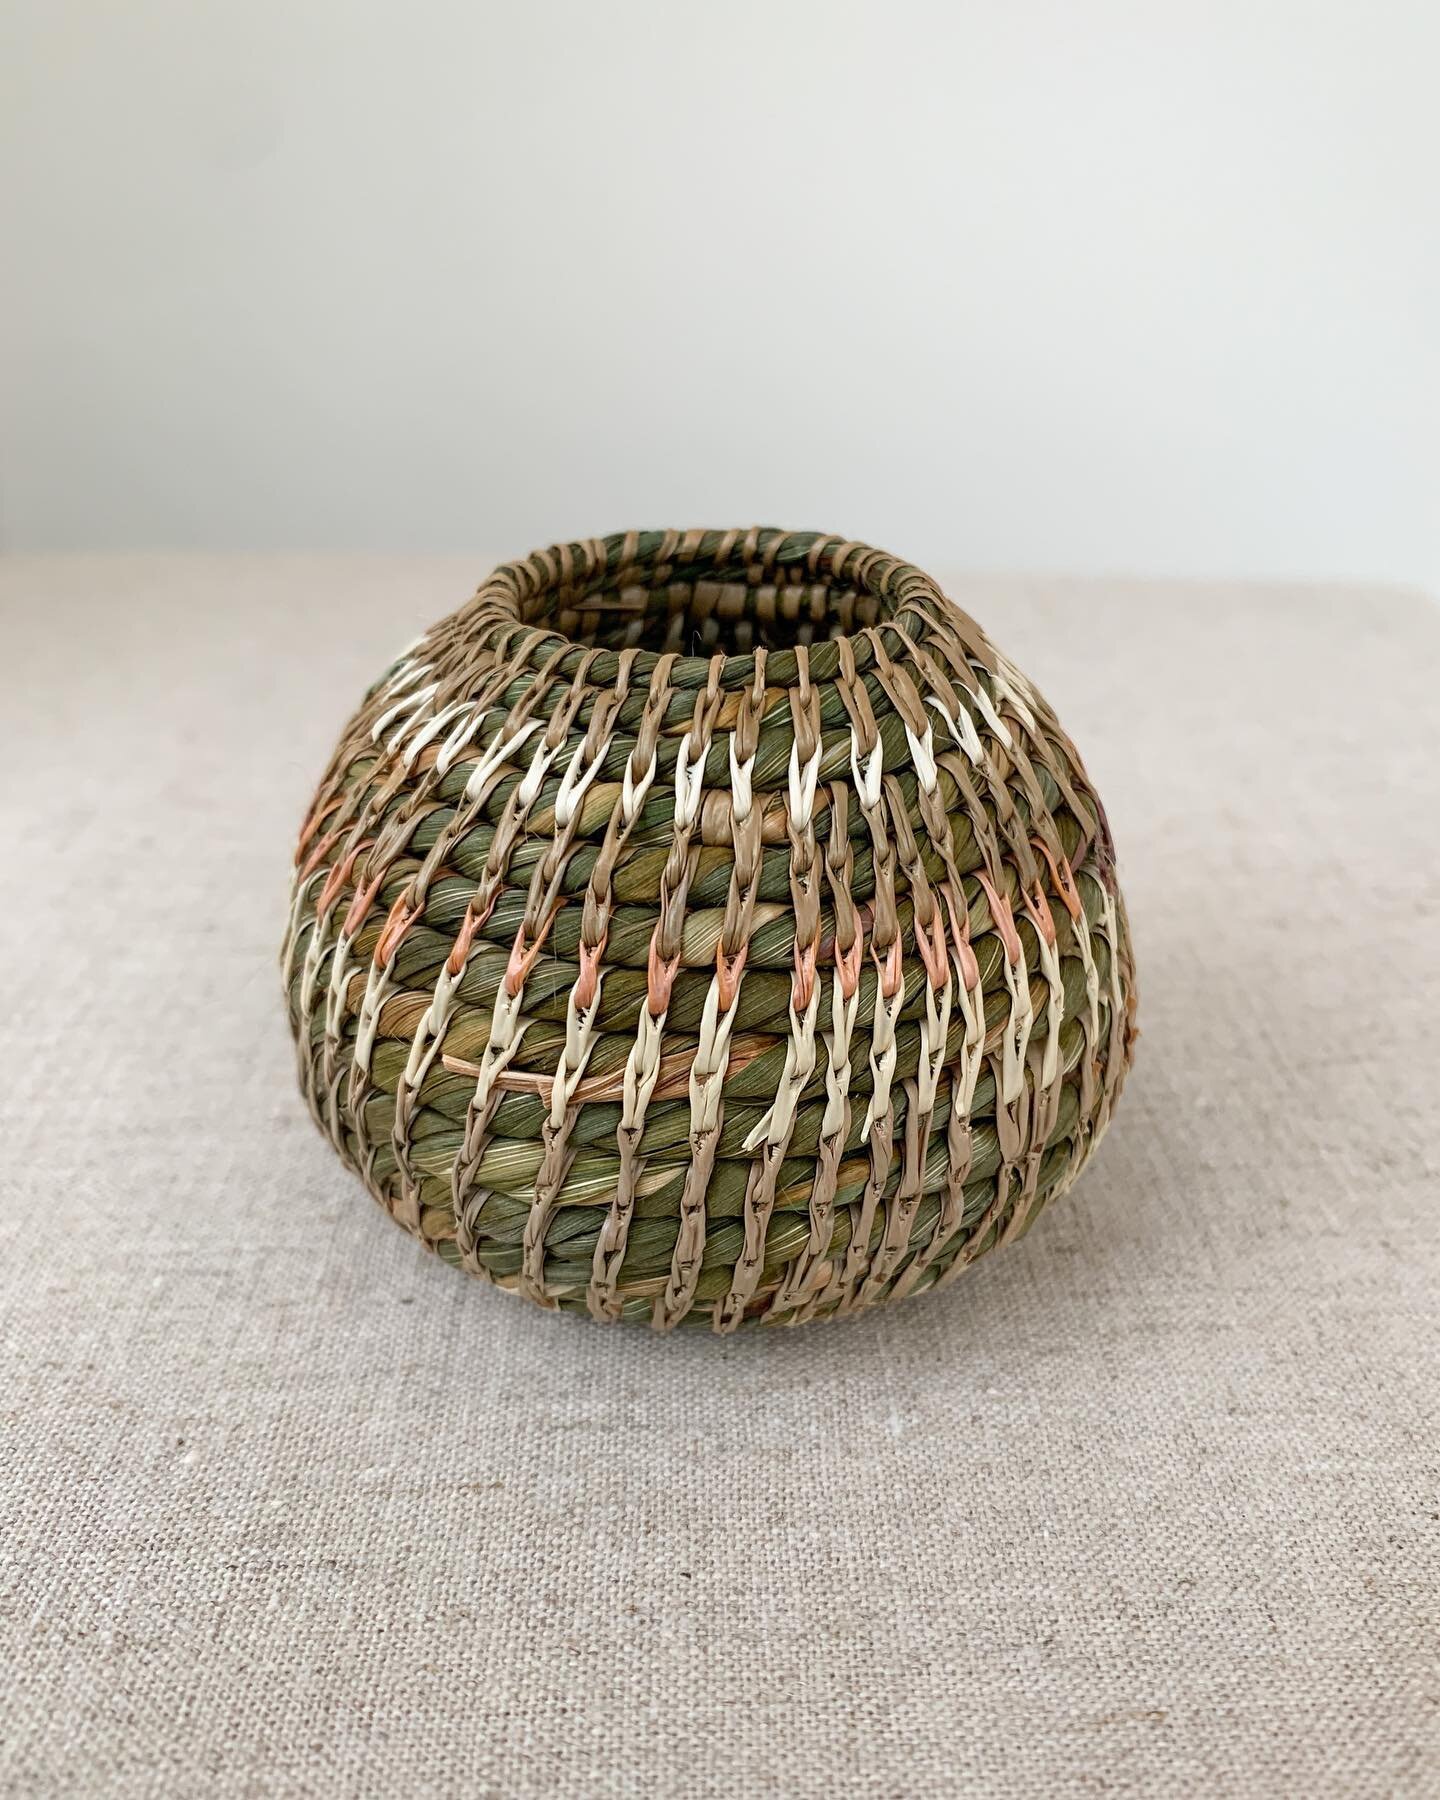 Found some photos of a collection of mini coiled baskets made in 2021. The core of these baskets are made from Blue Flag Iris (England) and the coiled weavers are made from Chunga Palm (Panam&aacute;). These mini baskets are the emergent creations of